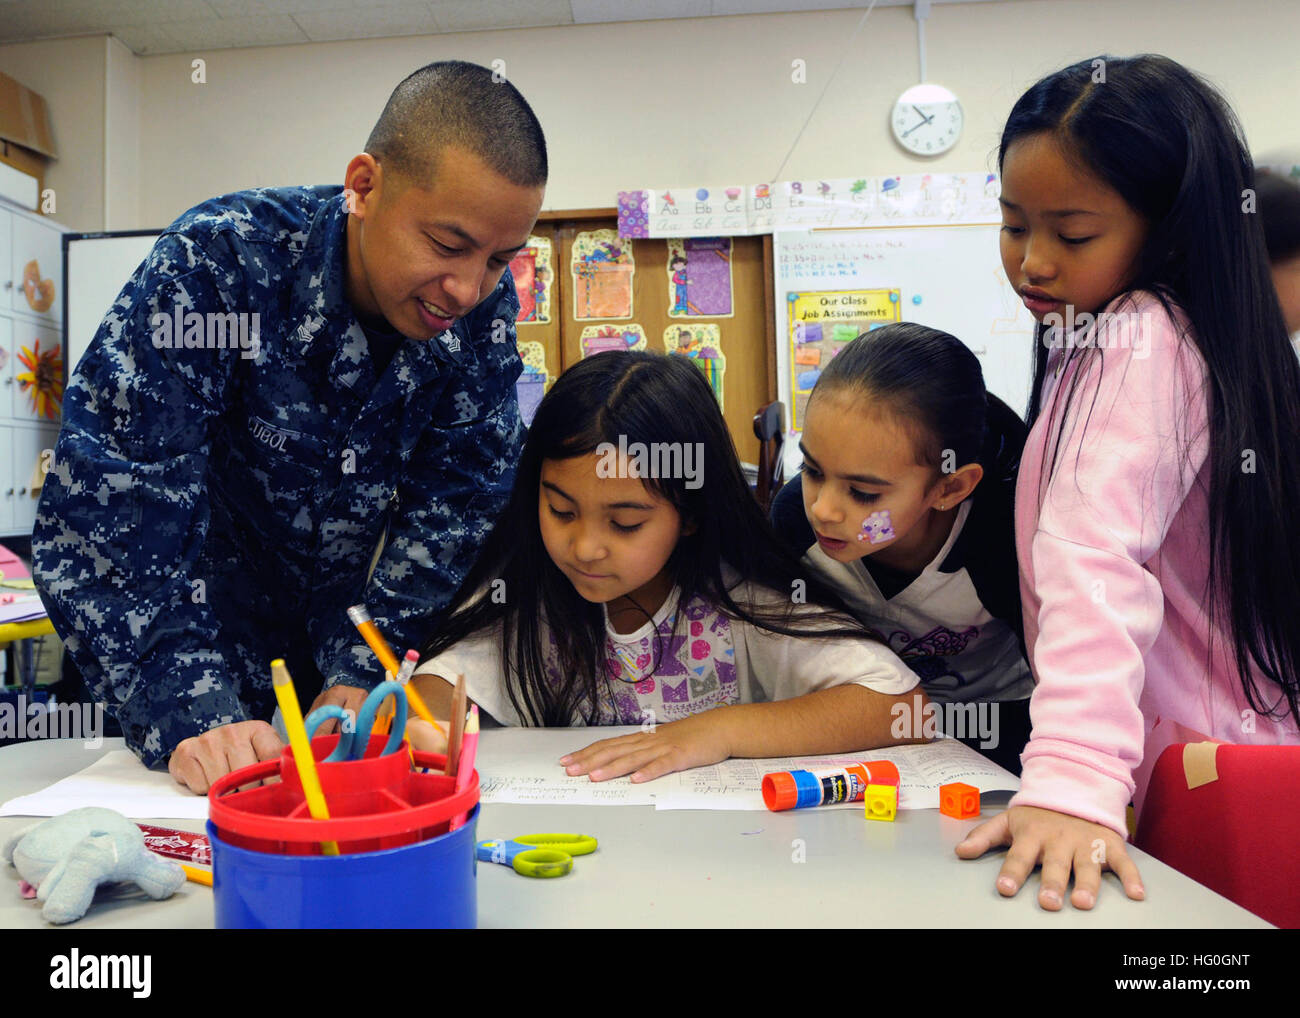 Culinary Specialist 1st Class Gomer Cubol, stationed aboard U.S. 7th Fleet flagship USS Blue Ridge (LCC 19), helps second grade students at Yokosuka Naval Base's Sullivans Elementary School with a classroom assignment during a community service event Feb. 14. (U.S. Navy photo by Mass Communications Specialst 2nd Class Jeff Troutman) USS Blue Ridge community service event 130214-N-ON468-078 Stock Photo